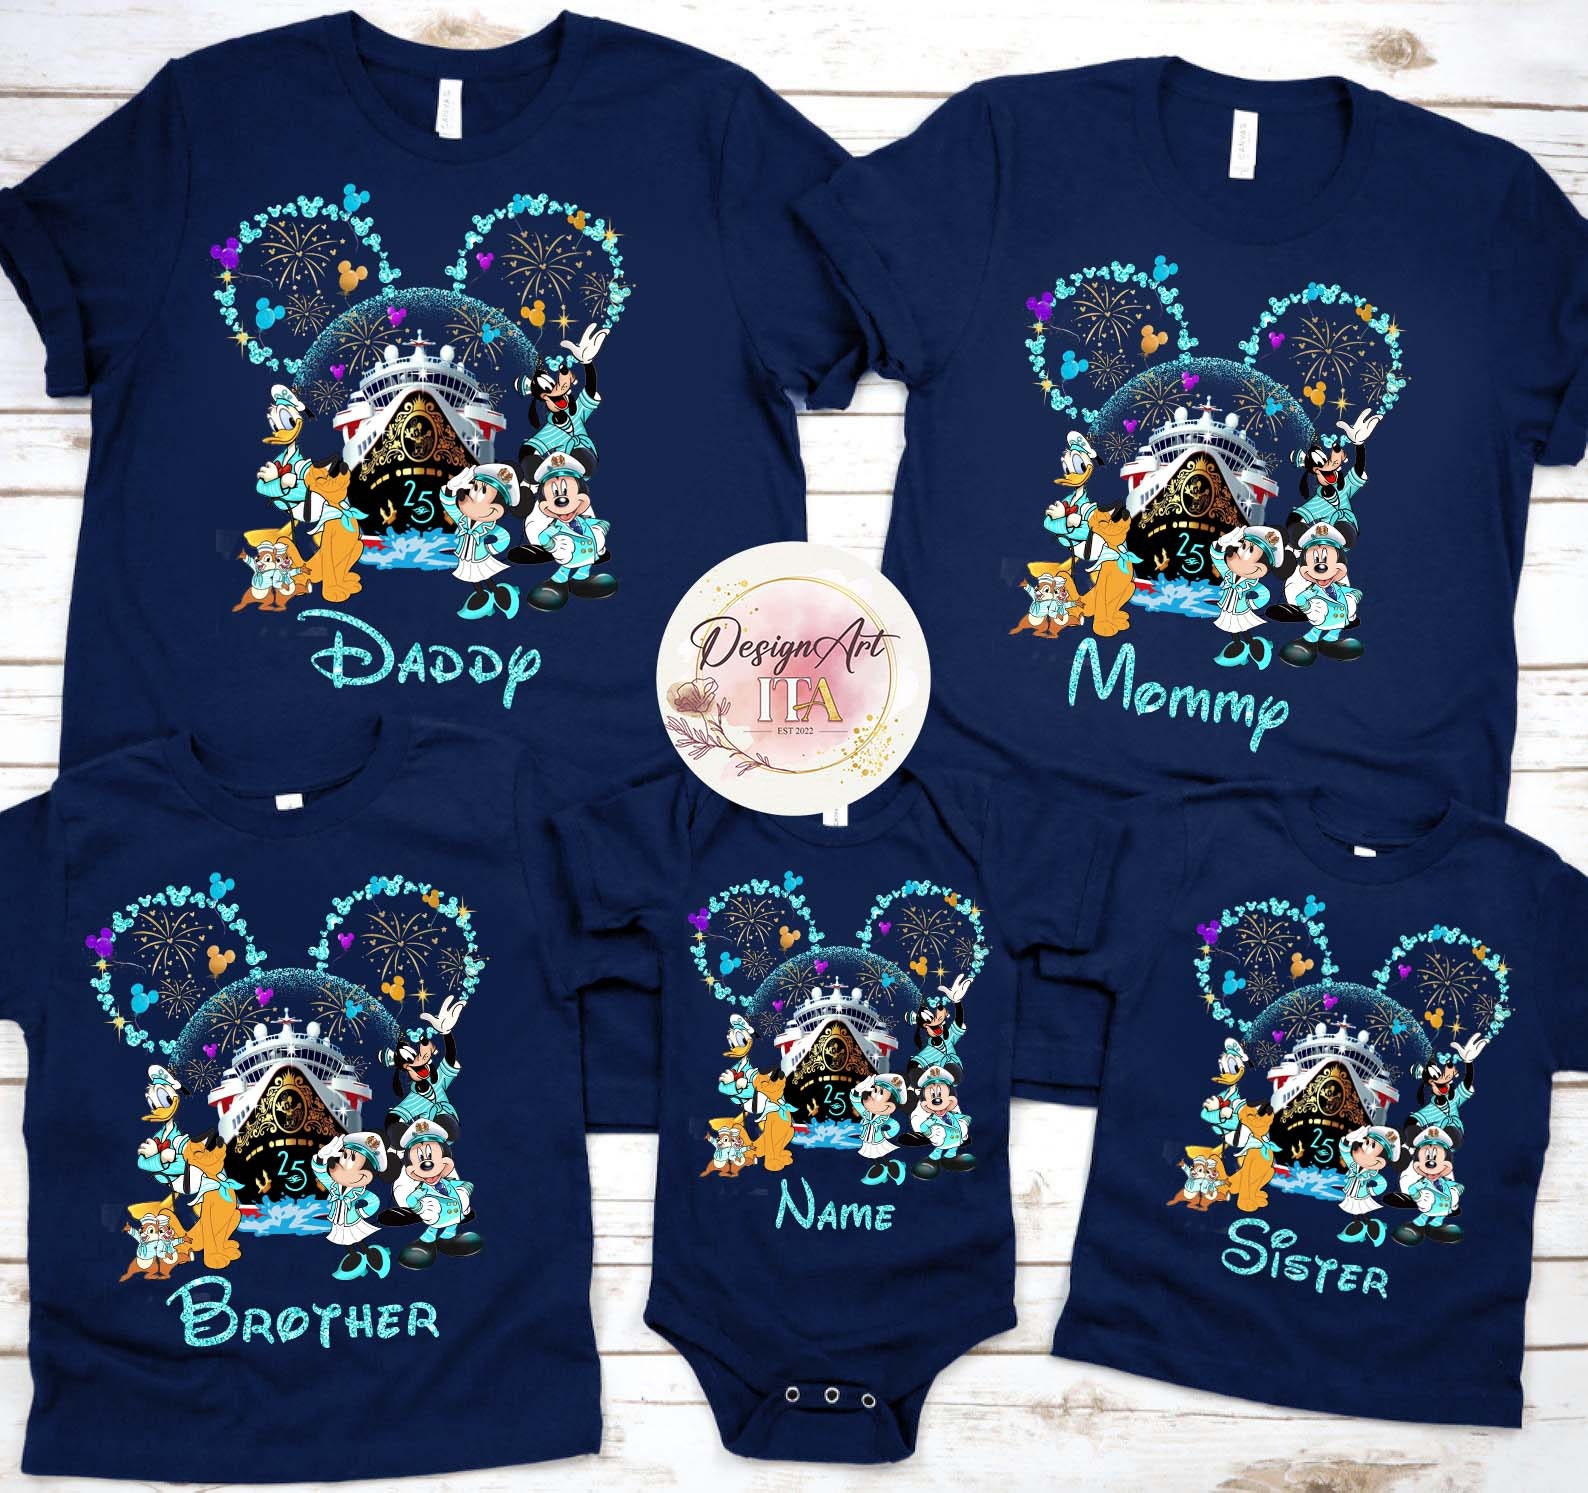 Discover Personalized Disney Cruise line 25th anniversary shirt